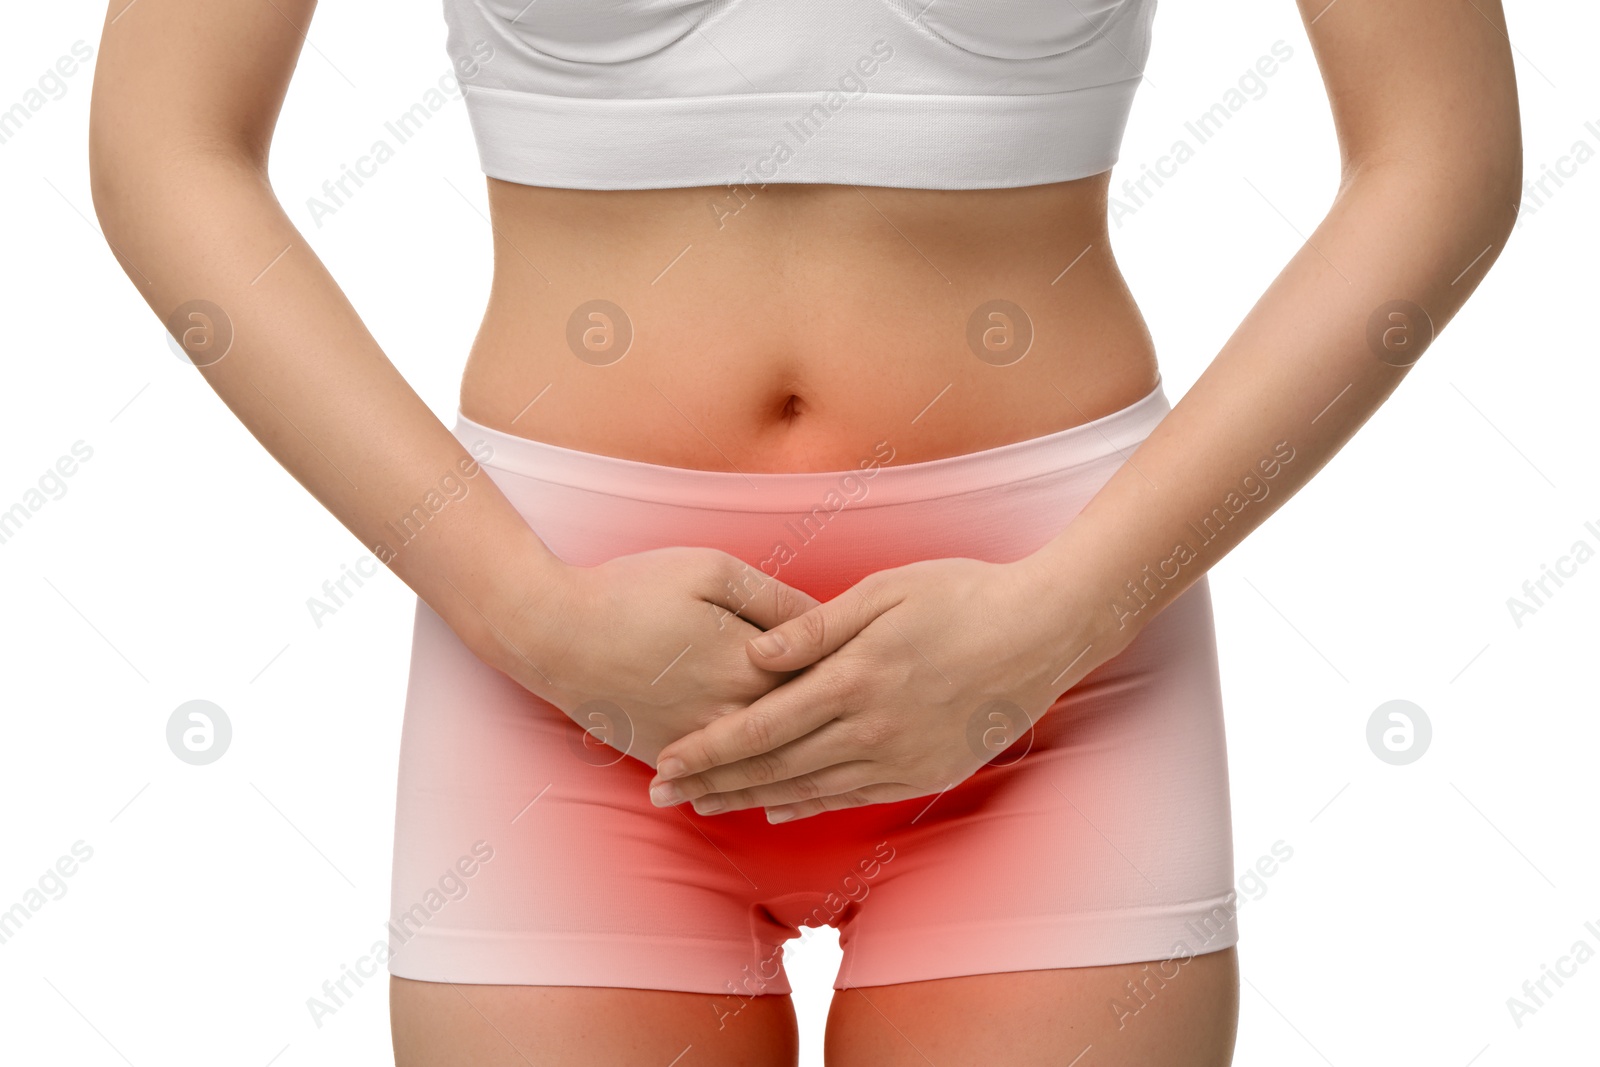 Image of Woman suffering from cystitis symptoms on white background, closeup